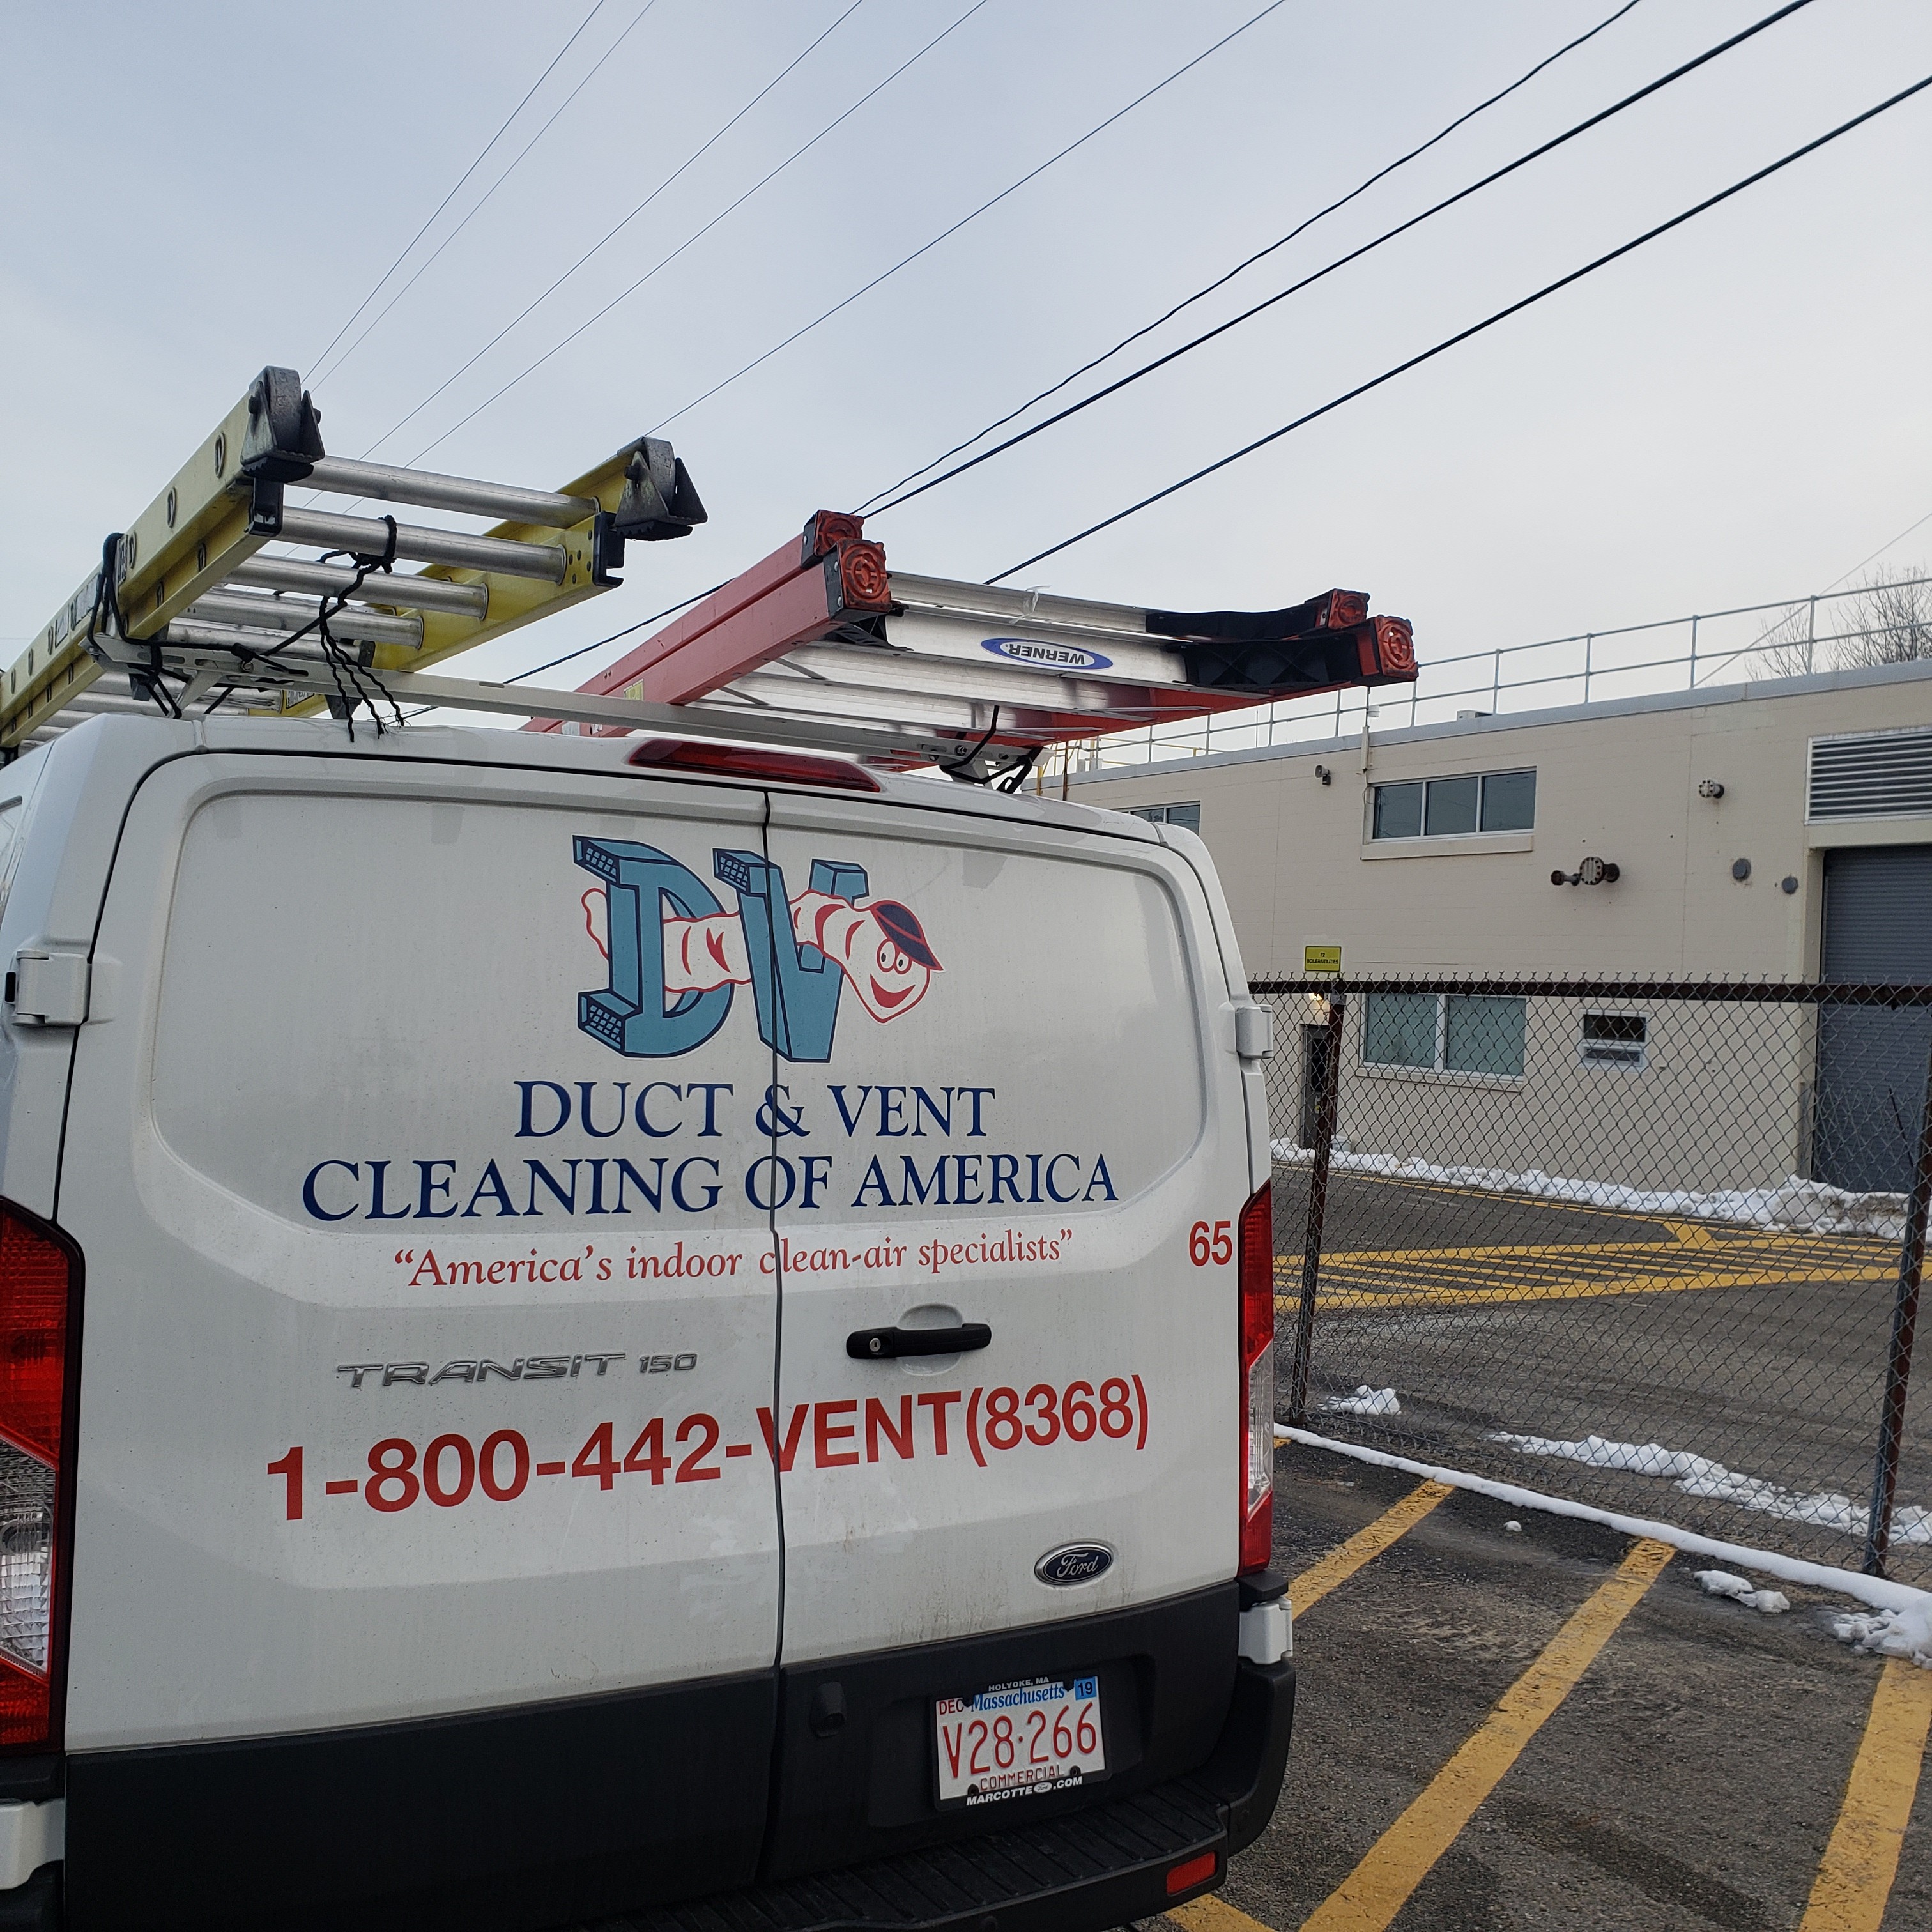 Ashland Specialty Chemicals - Industrial Building Duct Cleaning - East Freetown, MA Ashland-Specialty-Chemicals.jpg